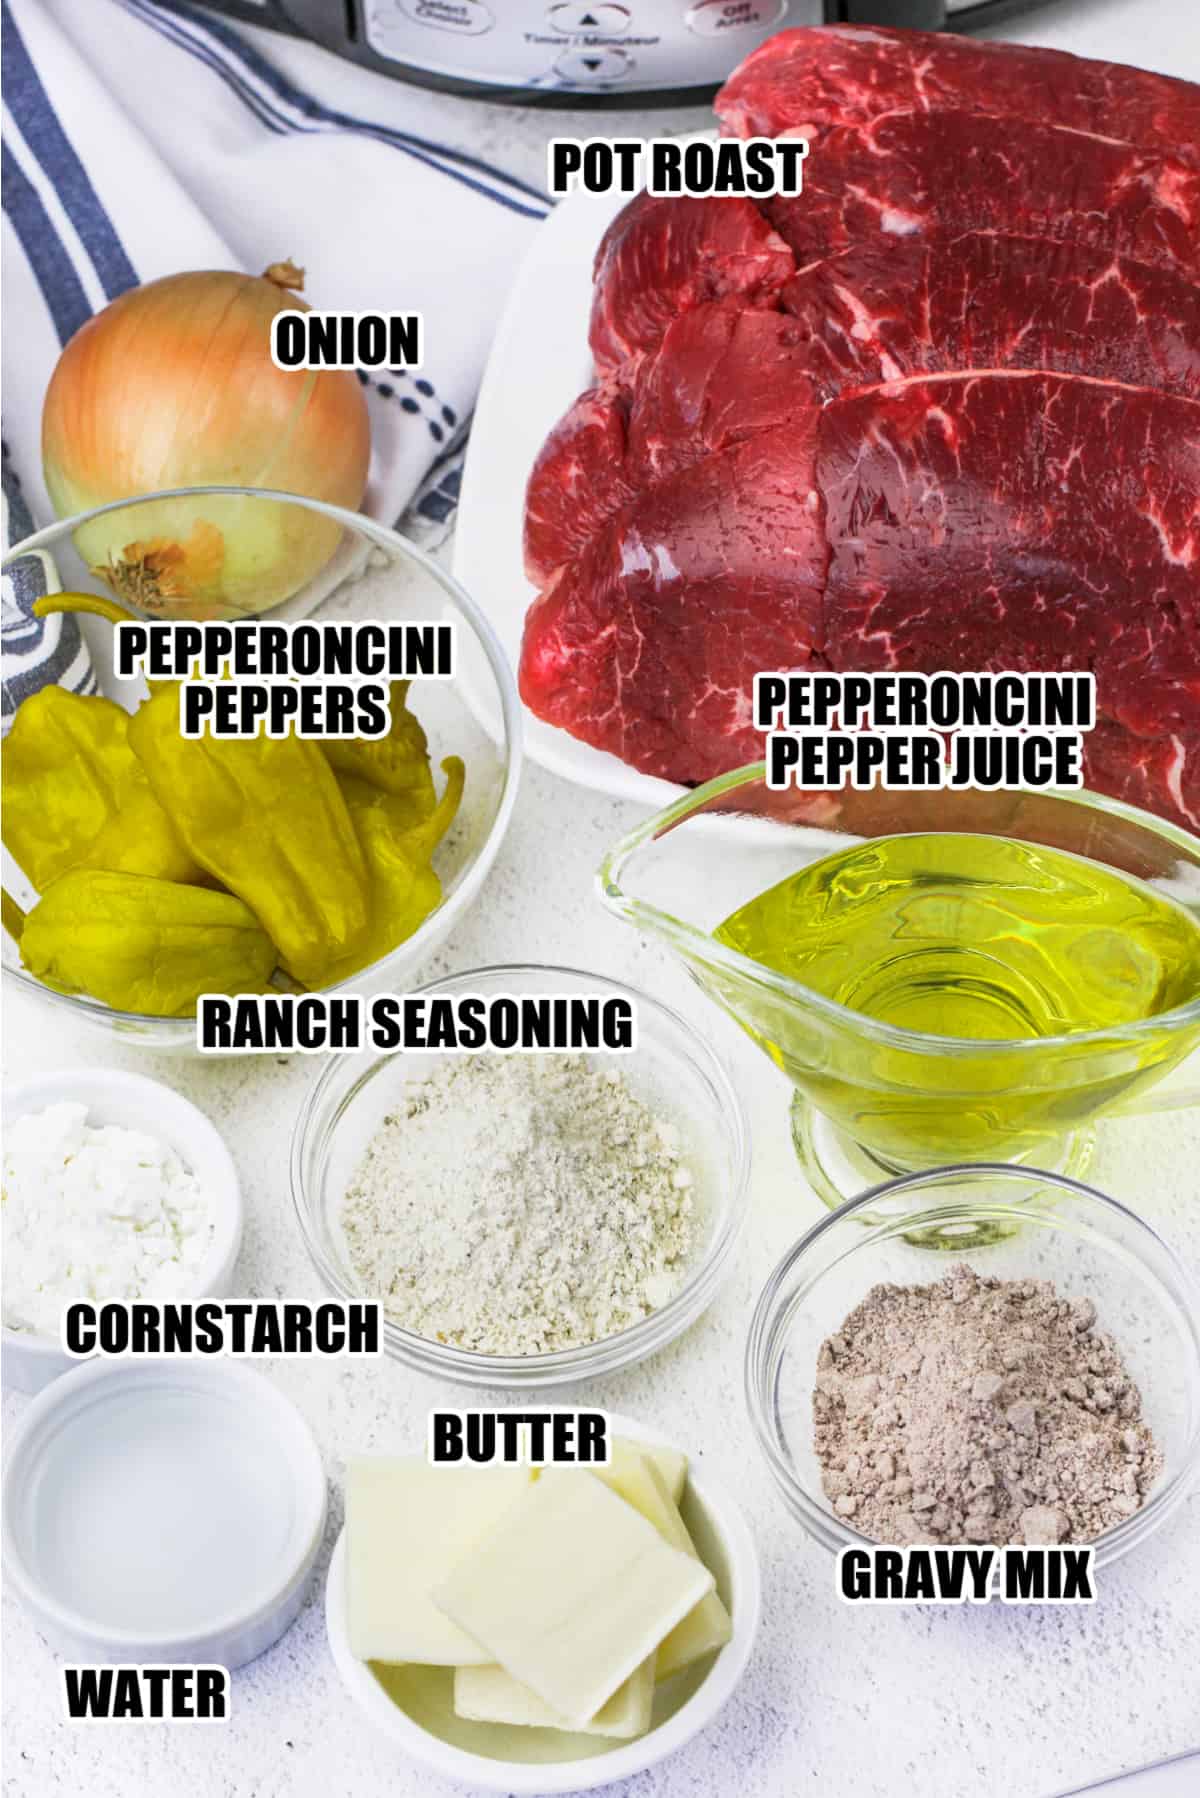 ingredients for slow cooker Mississippi pot roast including pot roast, onion, pepperoncini peppers, pepperoncini pepper juices, ranch seasoning, cornstarch, water, butter, and gravy mix